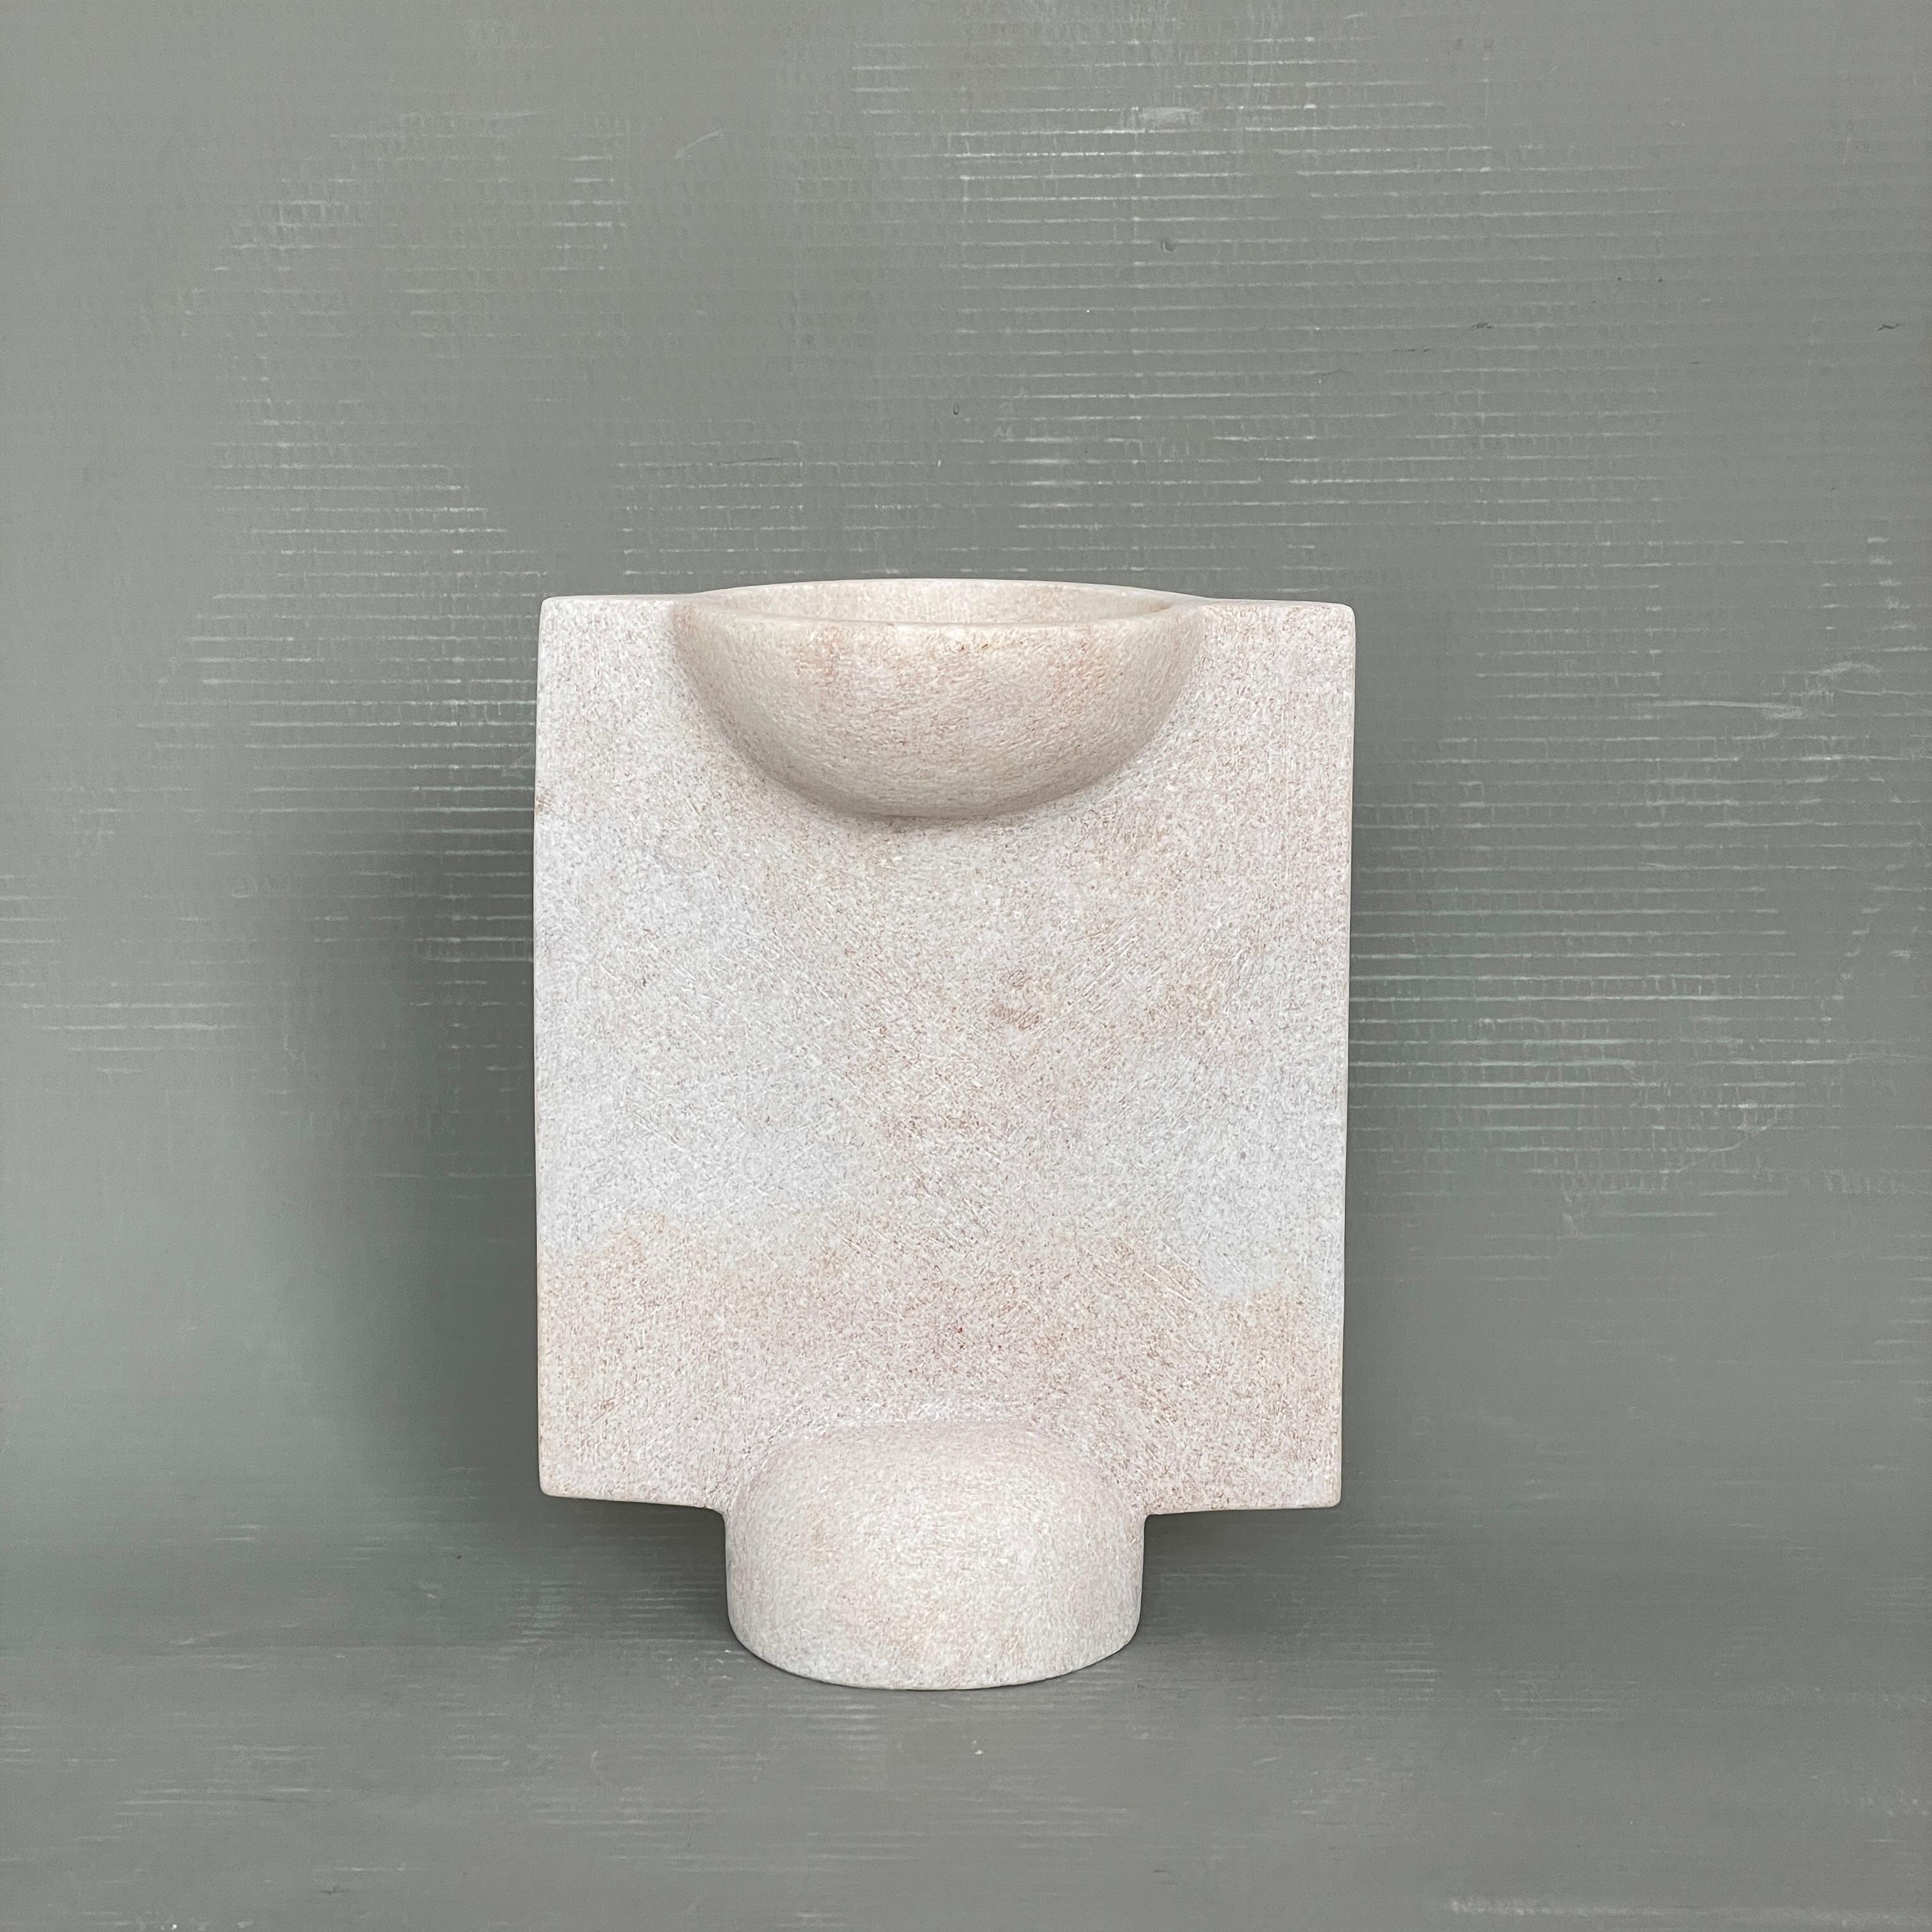 Hand Carved marble vessel by Tom Von Kaenel
Materials: Marble
Dimensions: W12.5 x D20 x H26 cm

Tom von Kaenel, sculptor and painter, was born in Switzerland in 1961. Already in his early
childhood he was deeply devoted to art. His desire to